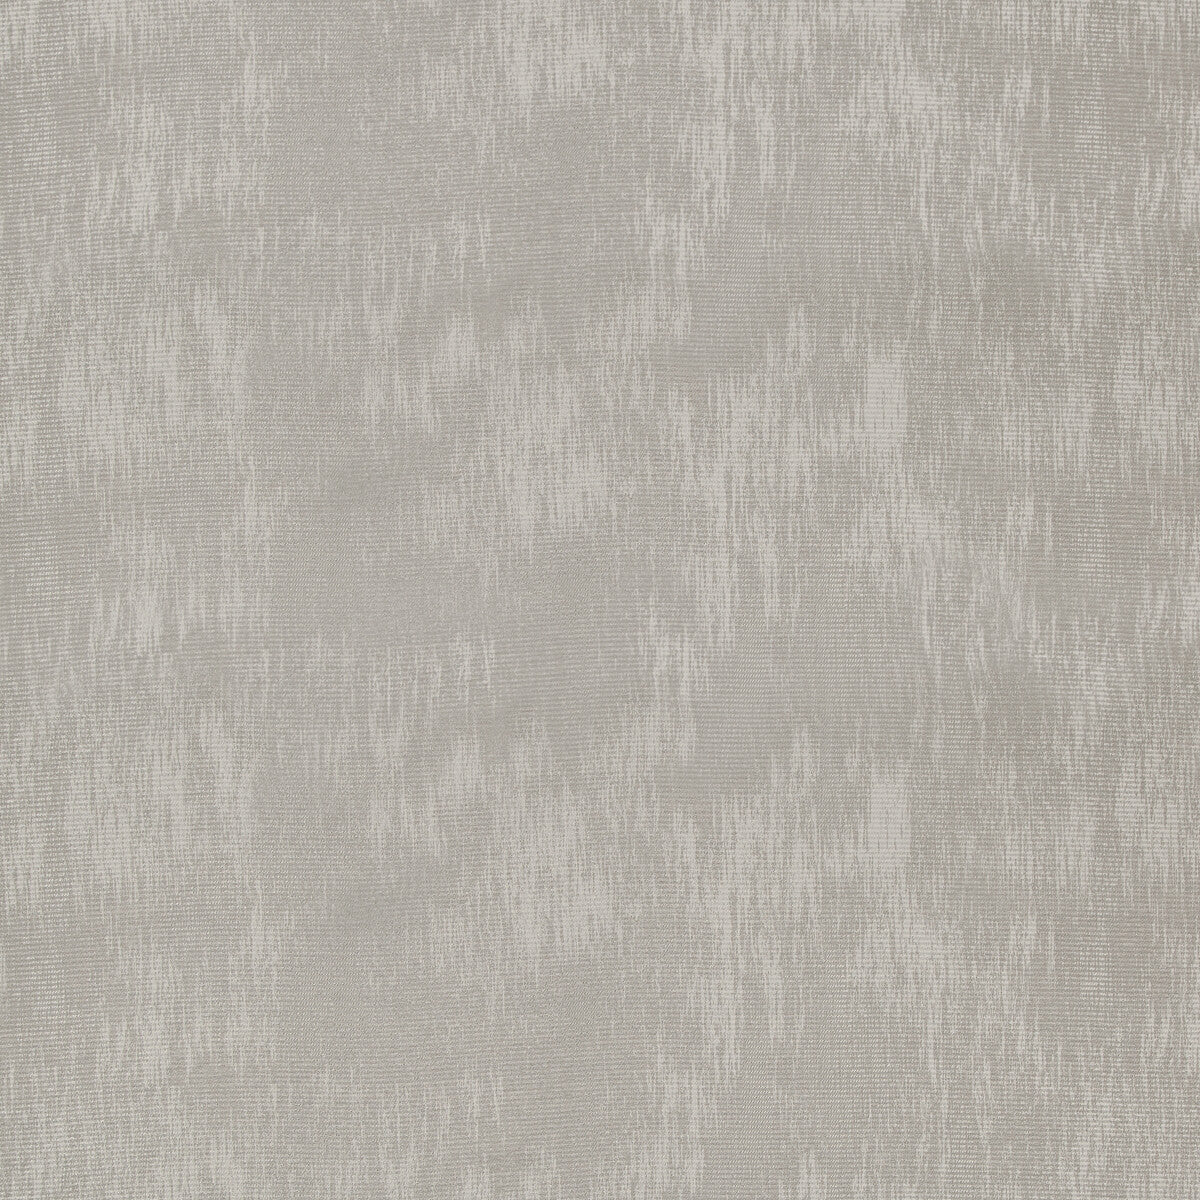 Estee fabric in shadow color - pattern 4653.11.0 - by Kravet Contract